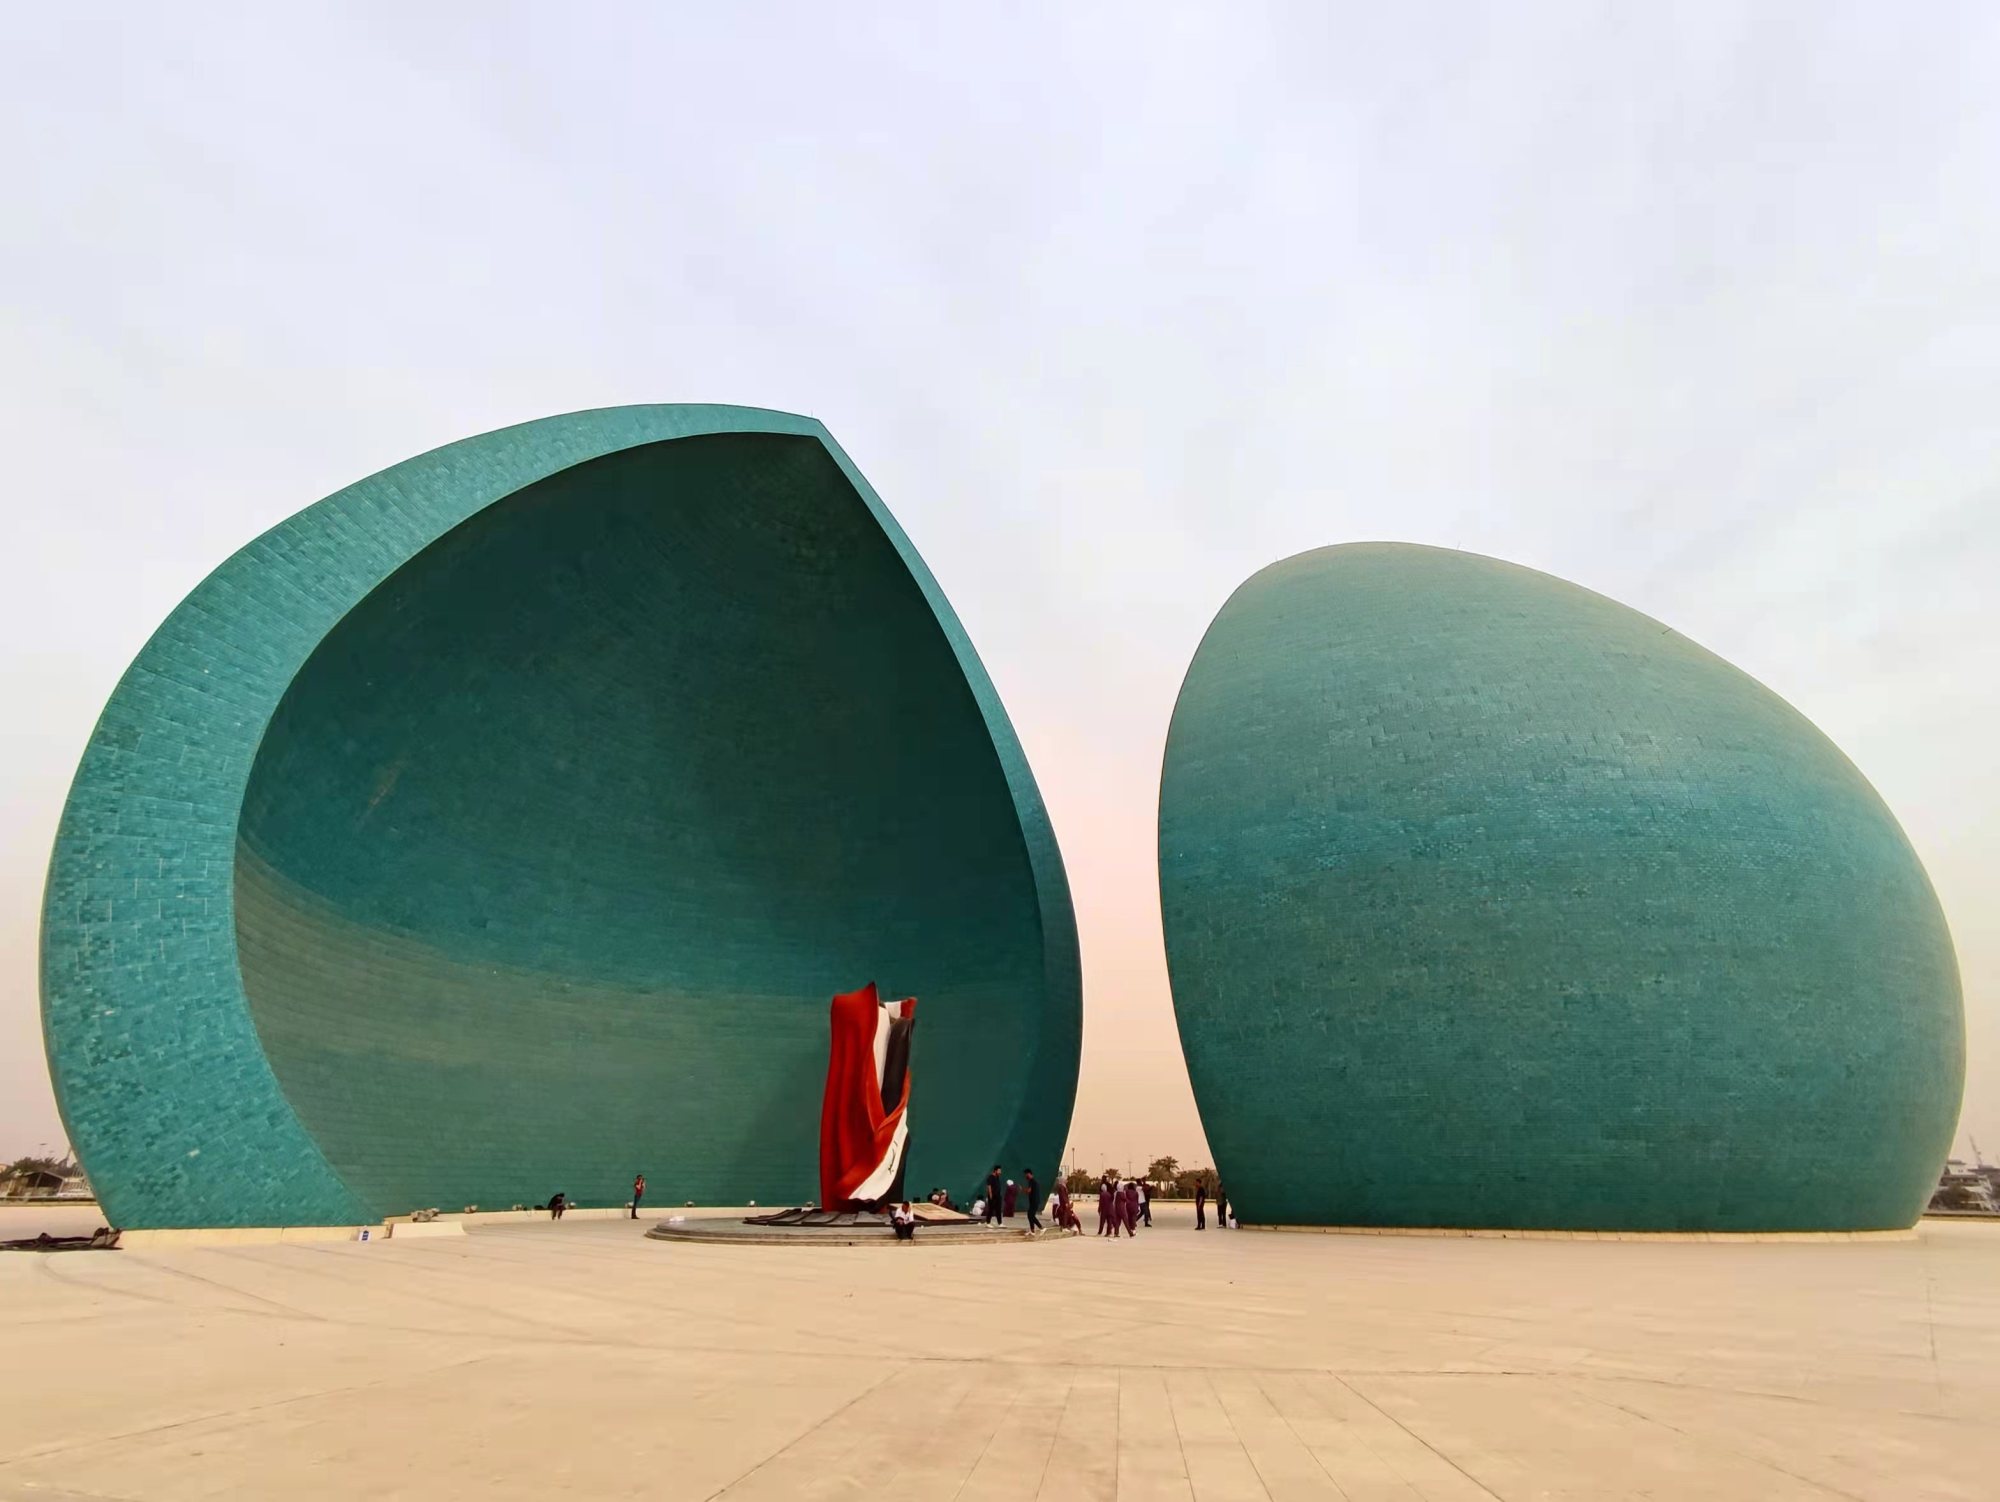 The Al-Shaheed Monument in Baghdad